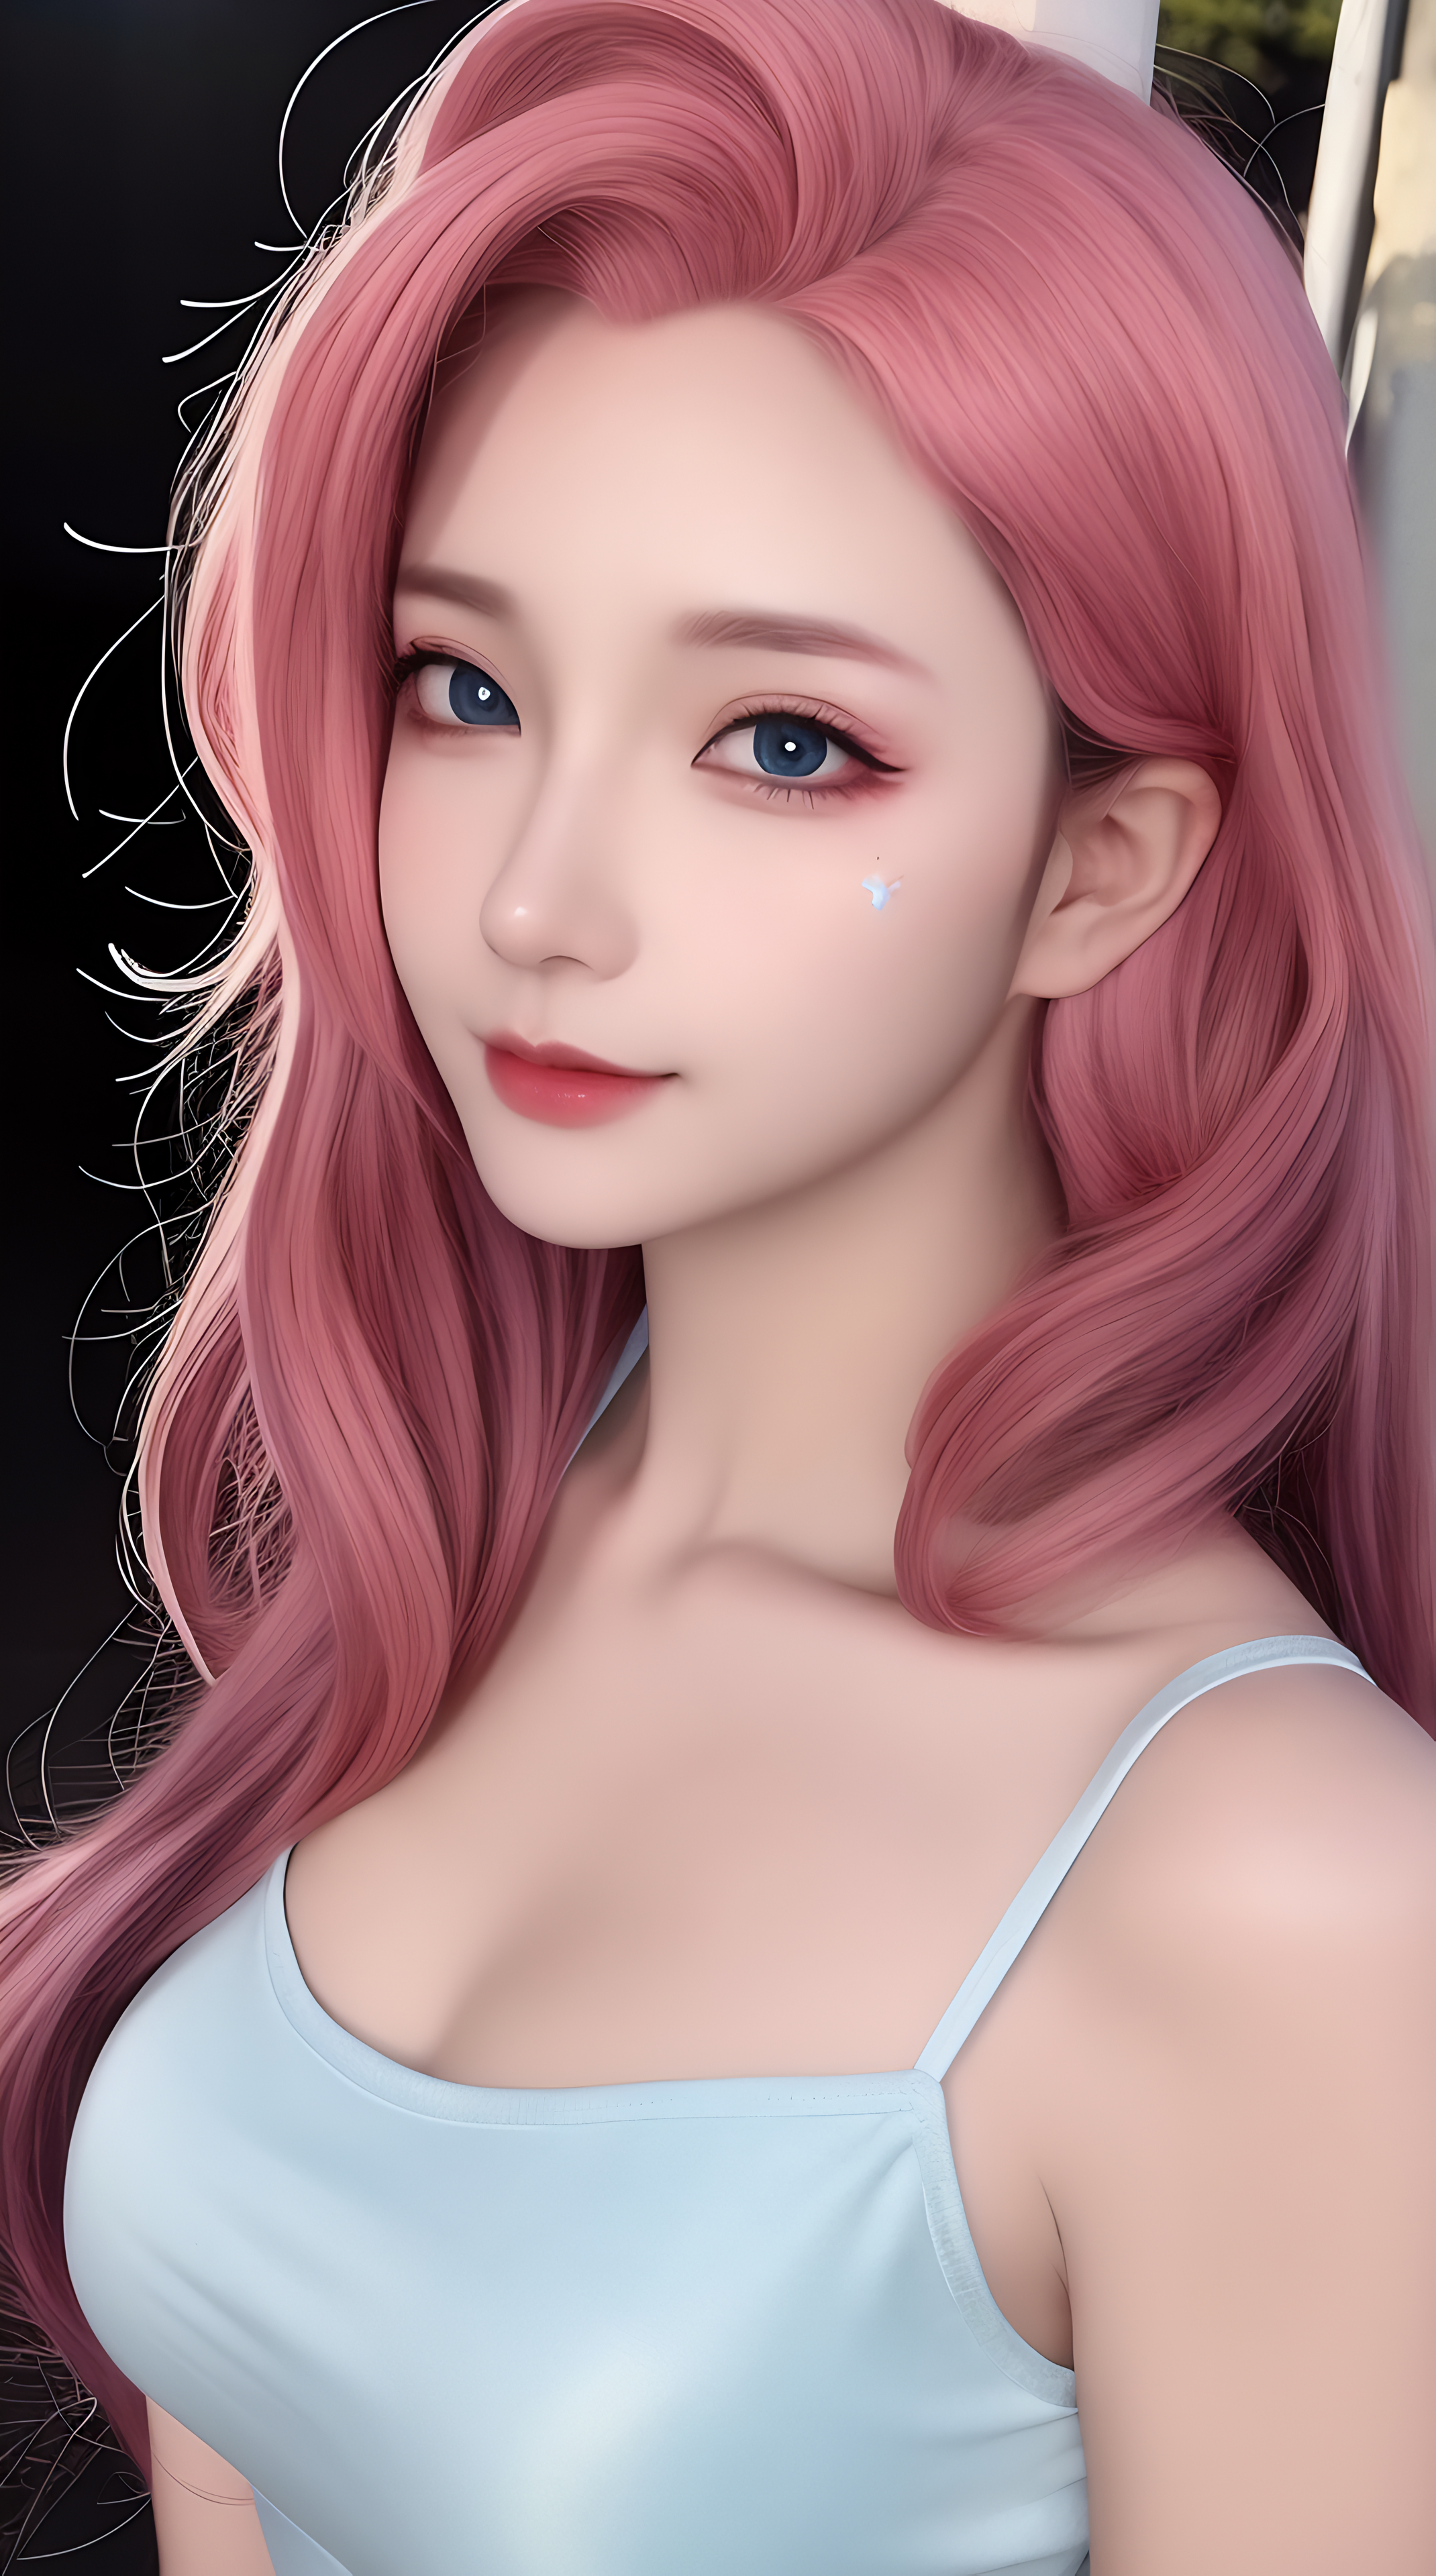 Seraphine League Of Legends League Of Legends Ai Art Pink Hair Vertical Smiling Looking At Viewer 2140x3840